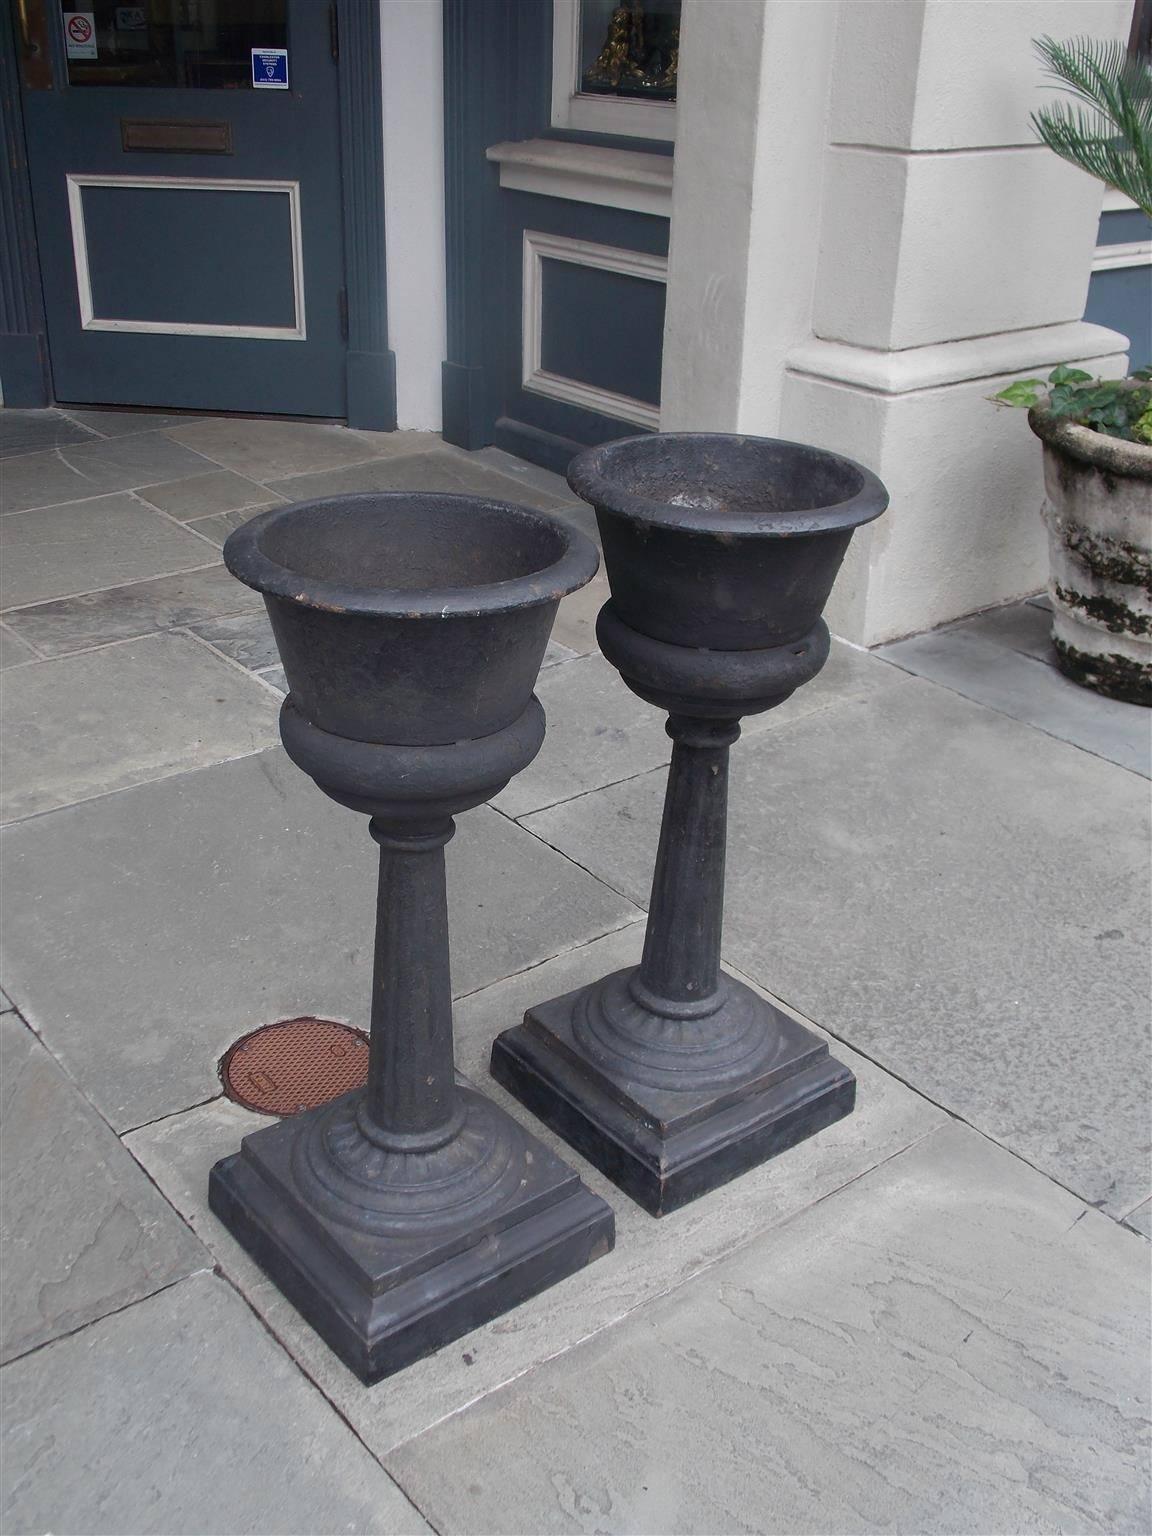 Pair of French cast iron and painted urn garden planters with tapered fluted ringed columns supported by circular squared step back plinths, Mid-19th century. Pair retain the original cast iron inserts for water drainage. 